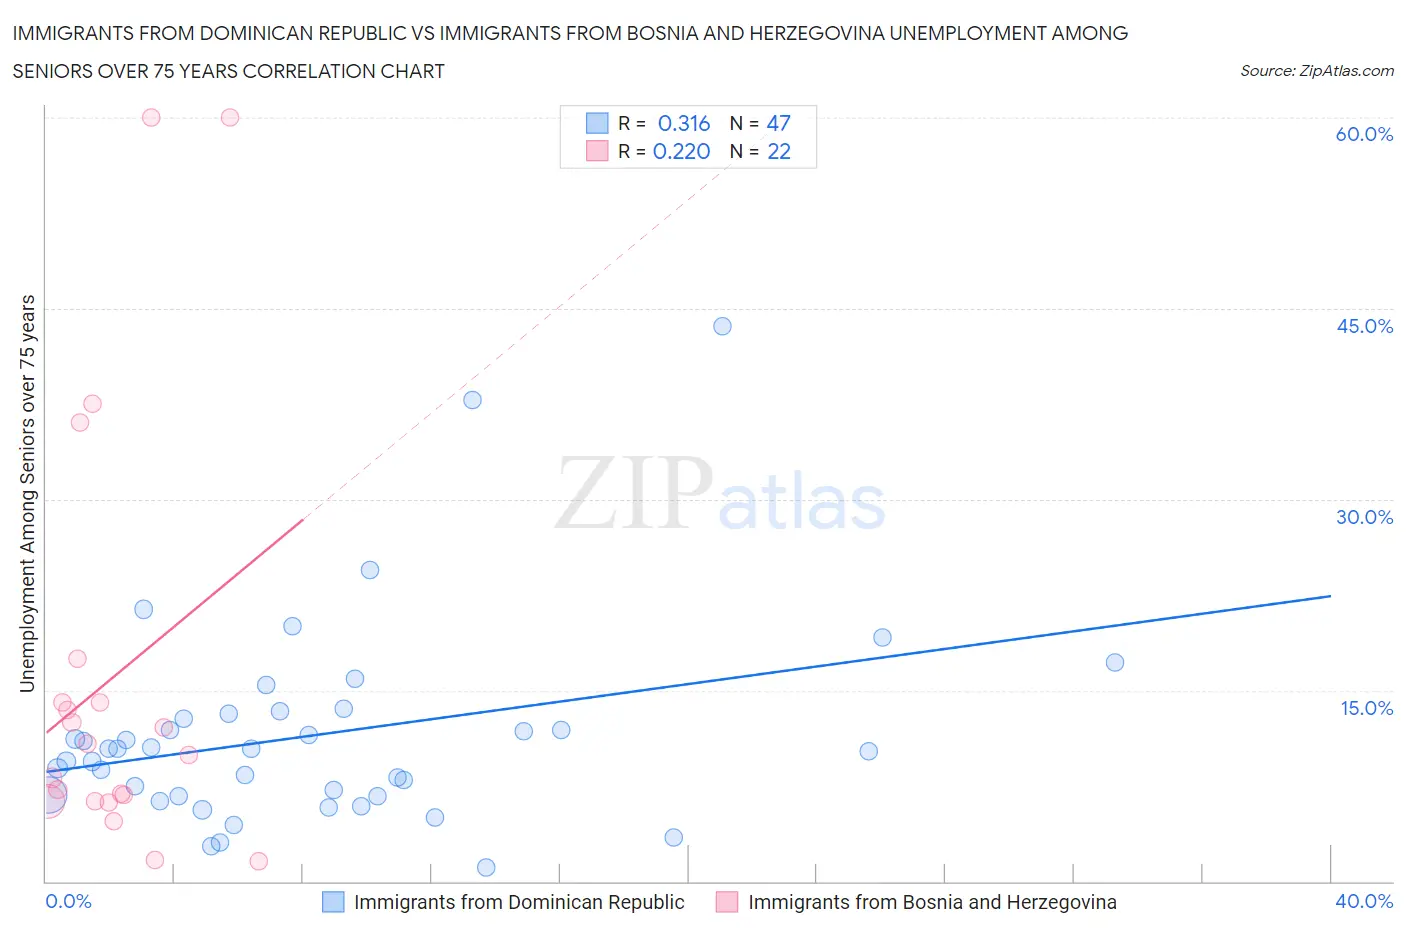 Immigrants from Dominican Republic vs Immigrants from Bosnia and Herzegovina Unemployment Among Seniors over 75 years